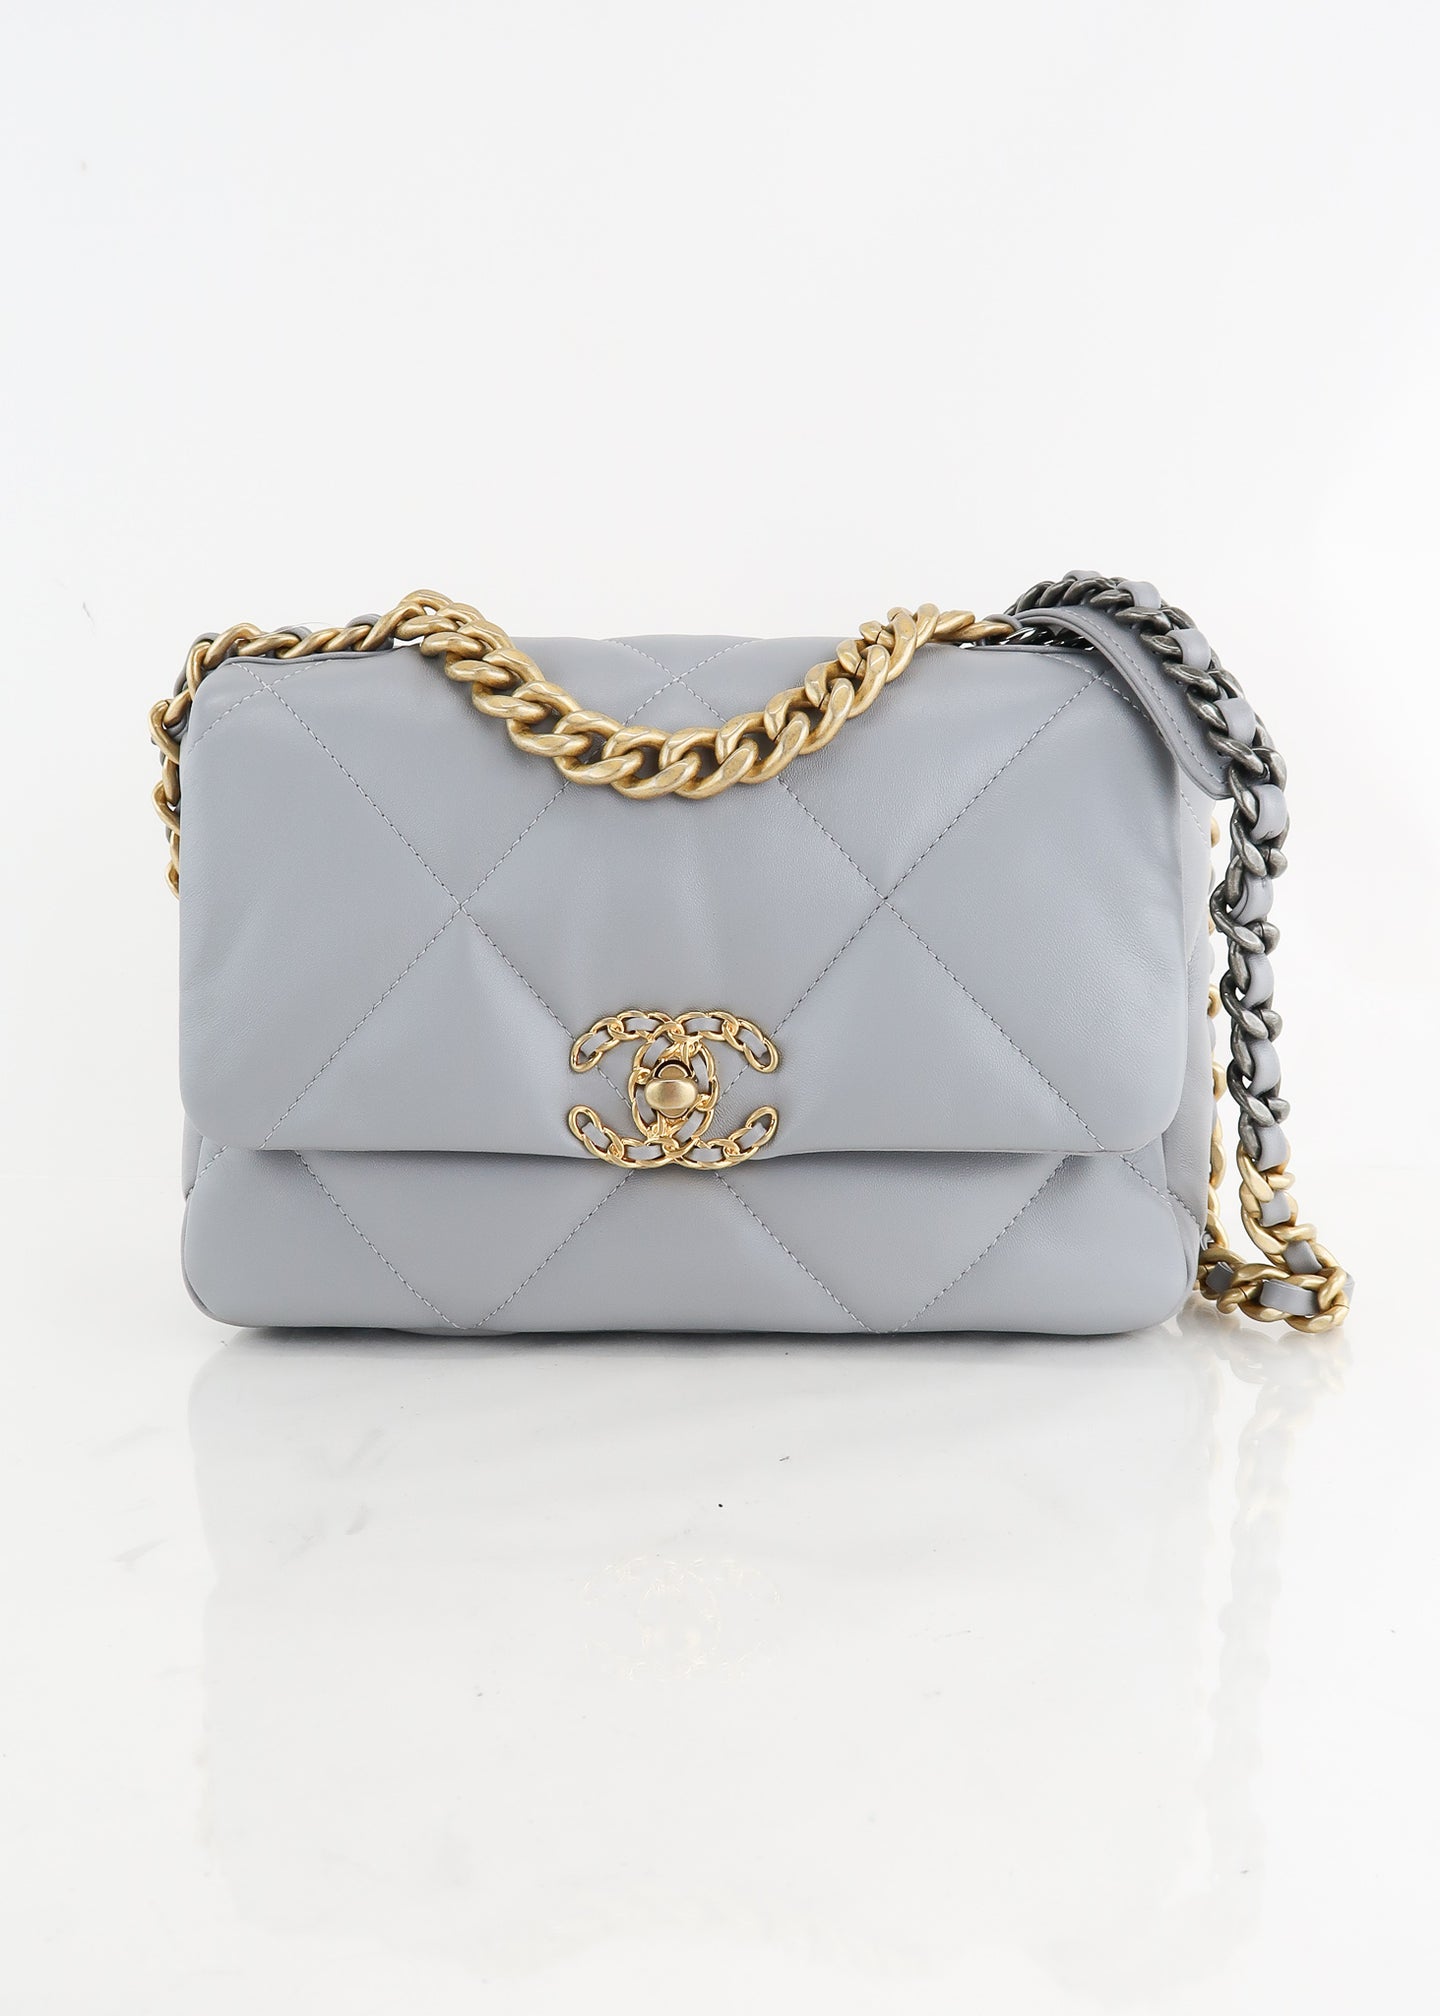 CHANEL Lambskin Quilted Medium Chanel 19 Flap White 1271524